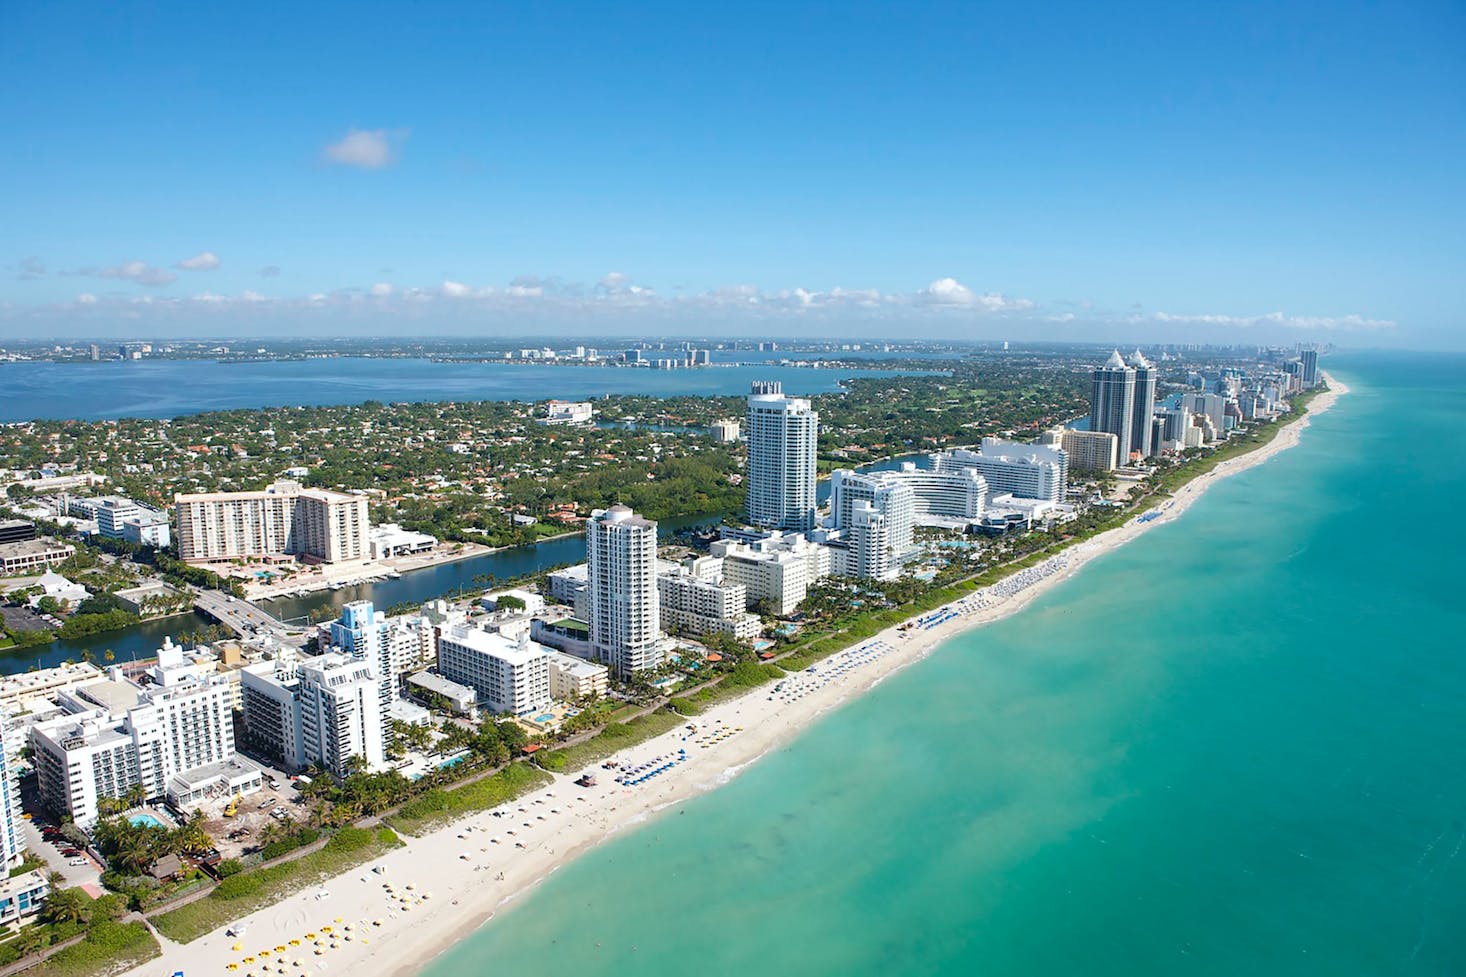 Exciting weekend trips from Miami